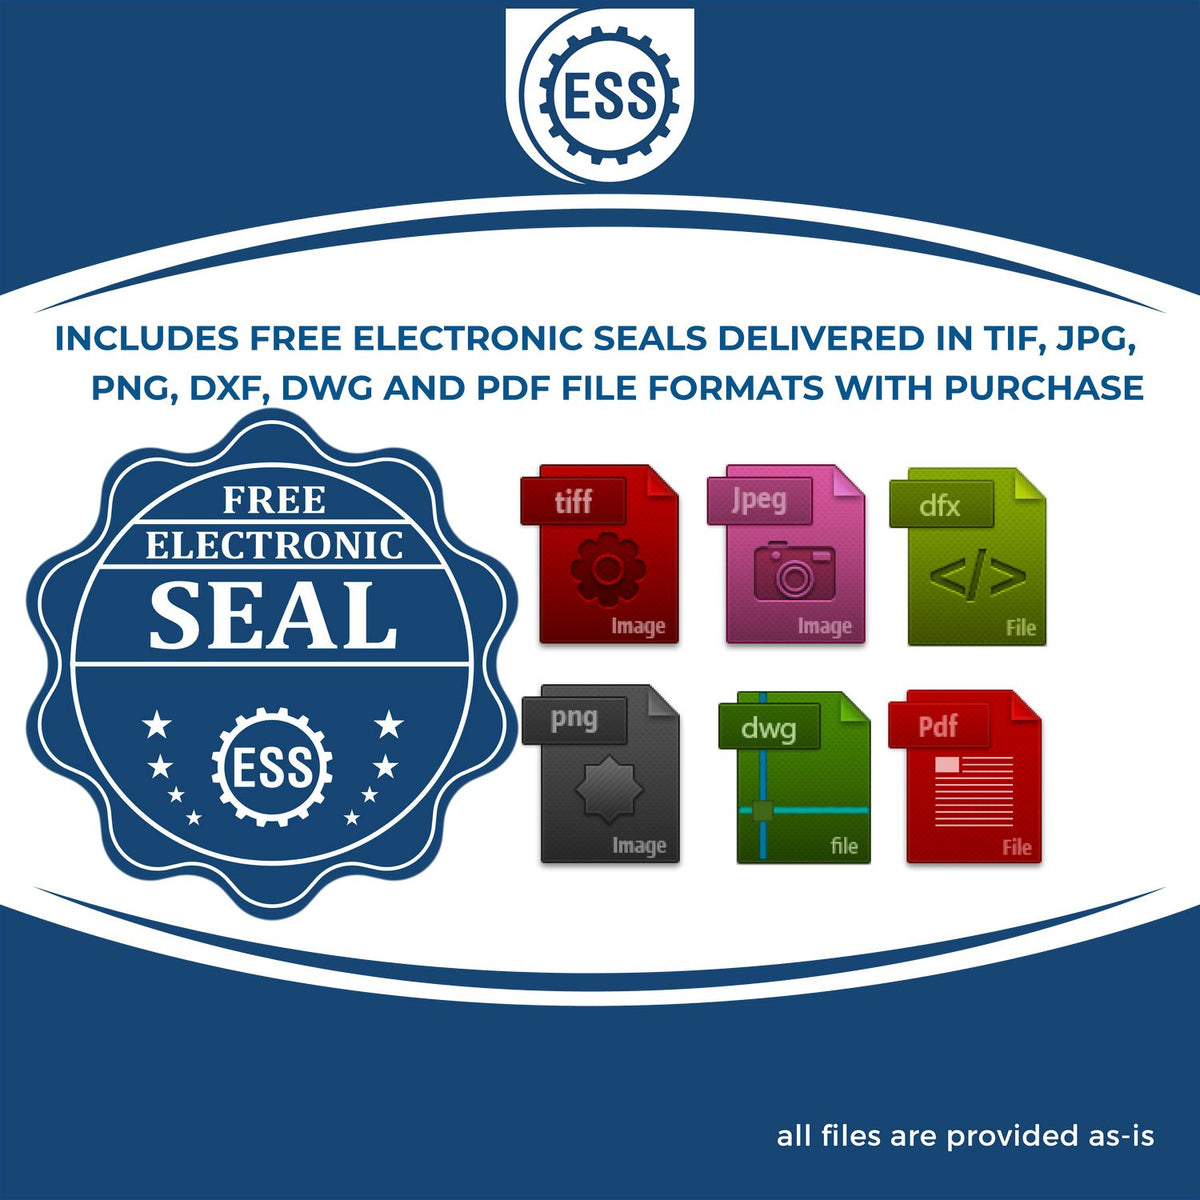 An infographic for the free electronic seal for the Gift New Jersey Architect Seal illustrating the different file type icons such as DXF, DWG, TIF, JPG and PNG.